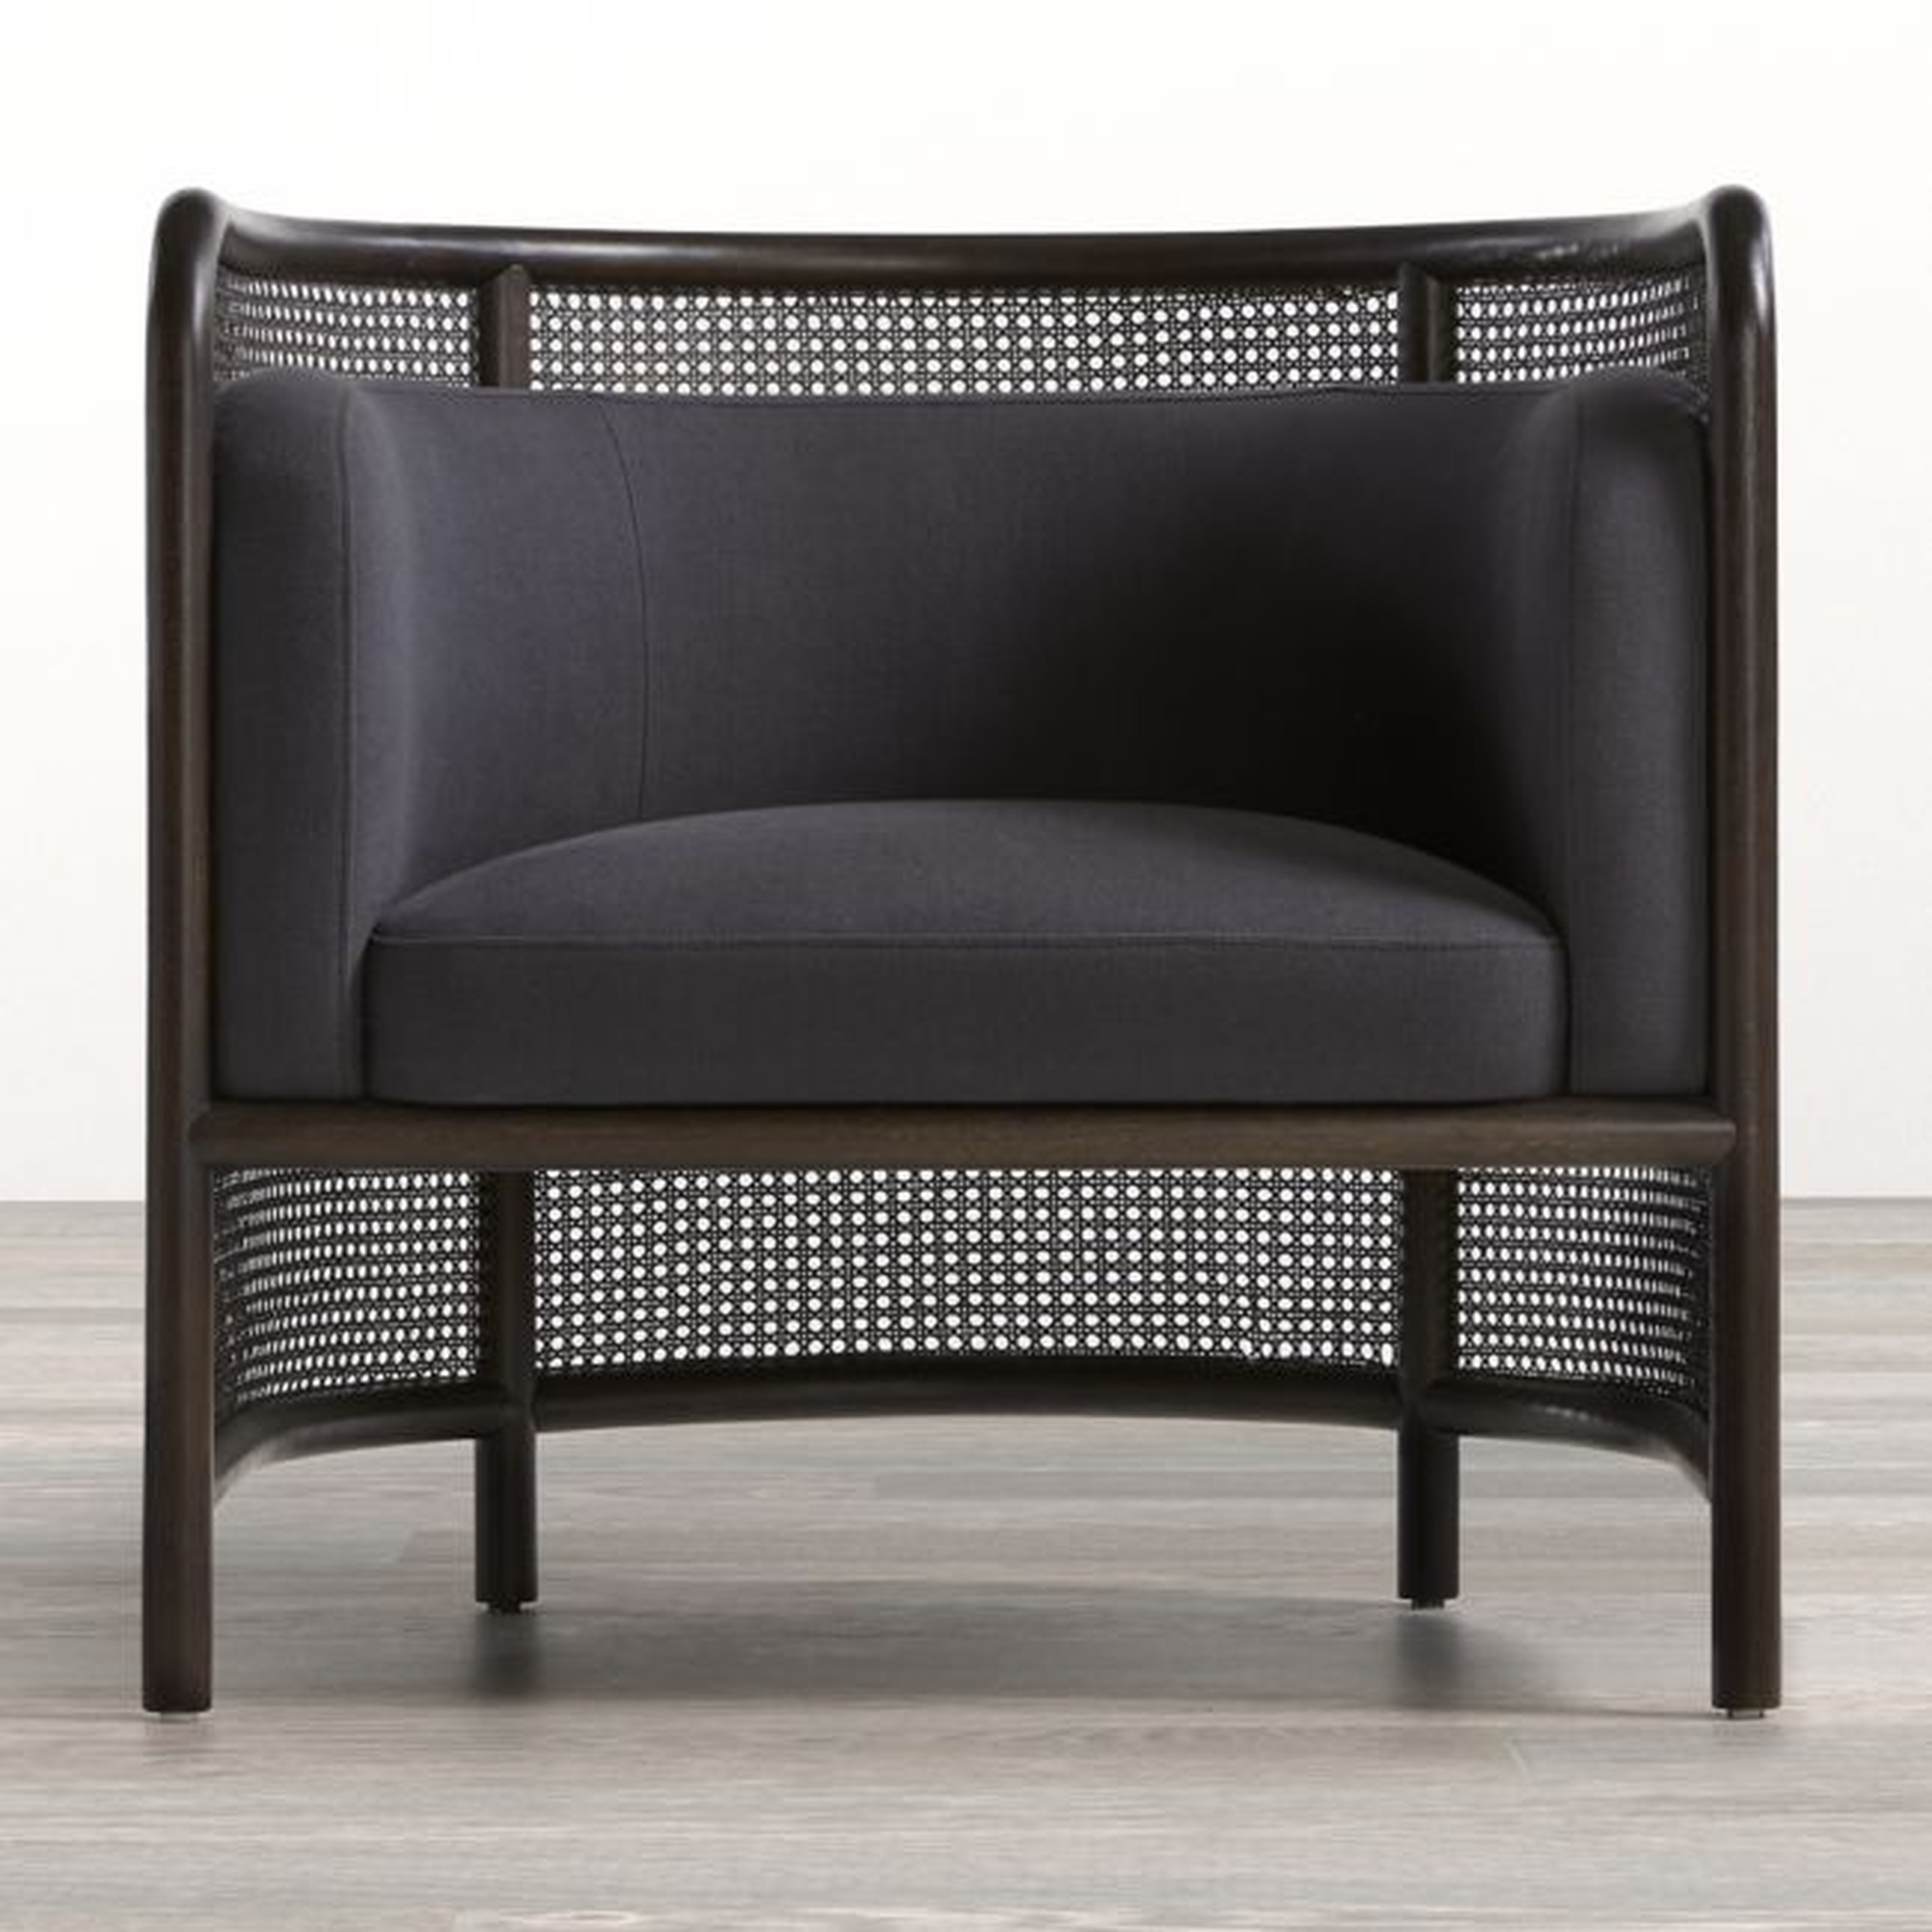 Fields Cane Back Charcoal Accent Chair (restock early july) - Crate and Barrel